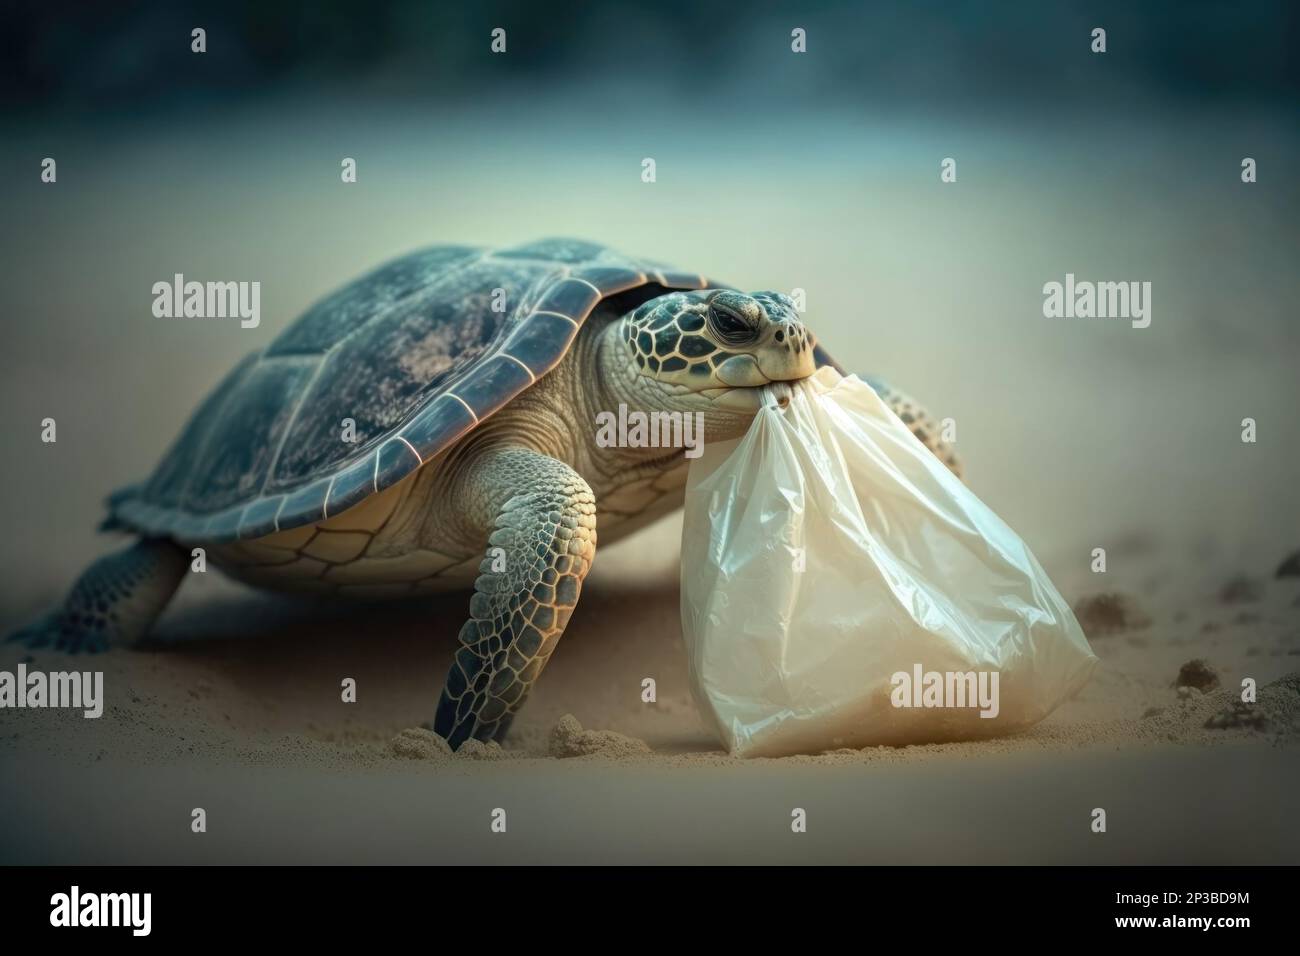 https://c8.alamy.com/comp/2P3BD9M/turtle-with-a-plastic-bag-in-its-mouth-on-the-sand-plastic-pollution-in-ocean-environmental-problem-turtles-can-eat-plastic-bags-mistaking-them-for-2P3BD9M.jpg